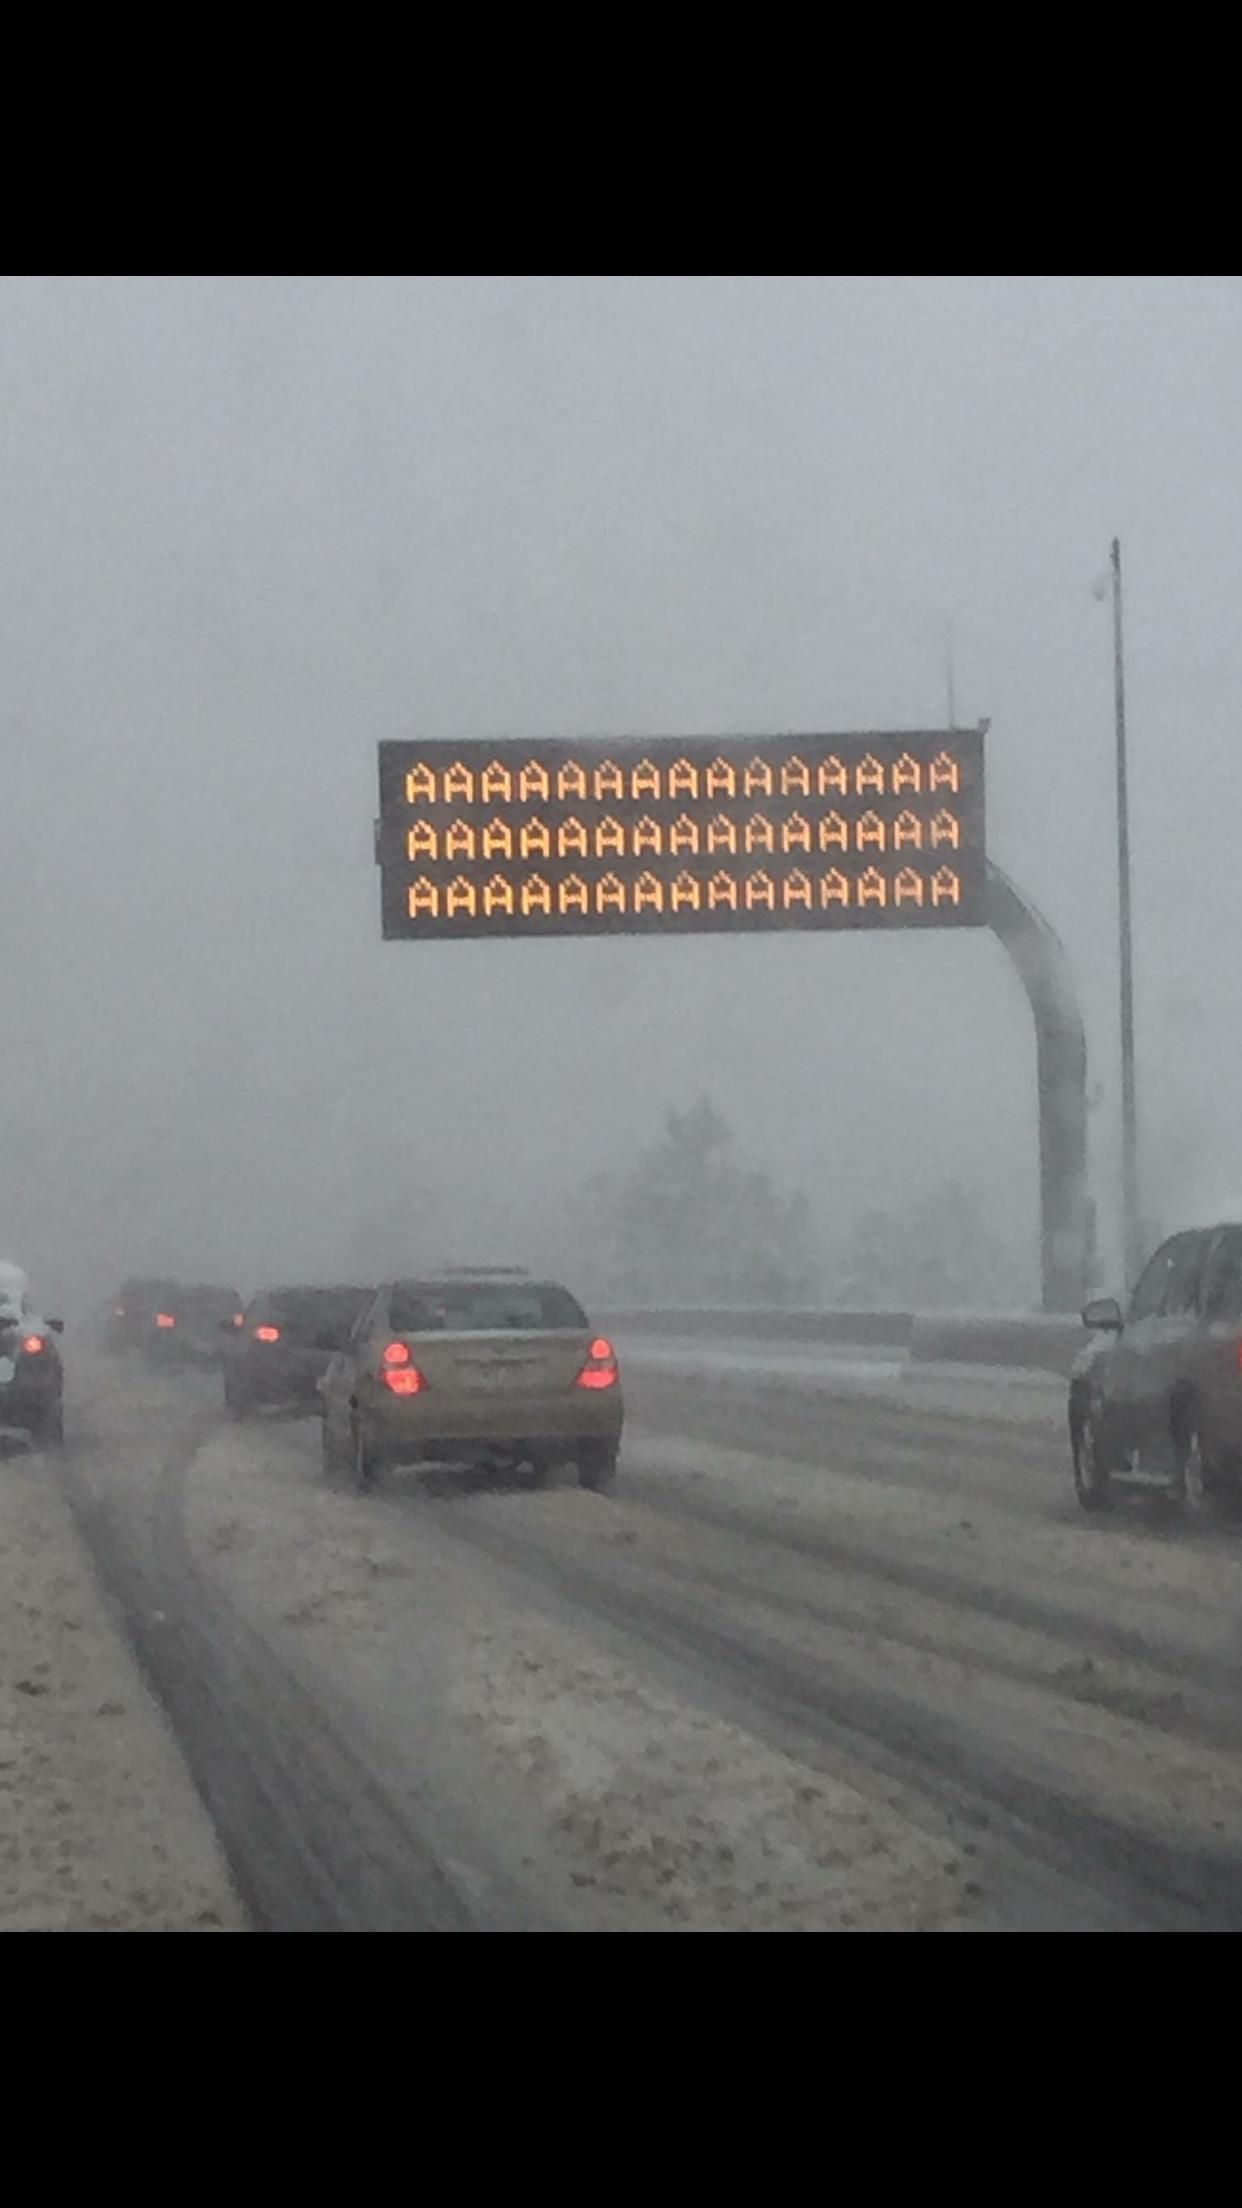 I live in Denver where yesterday it was 65 and sunny and today it is blizzard conditions with an expected 10" 
of snow. As I was driving to work I caught this emergency road sign that correctly summarized my feelings.